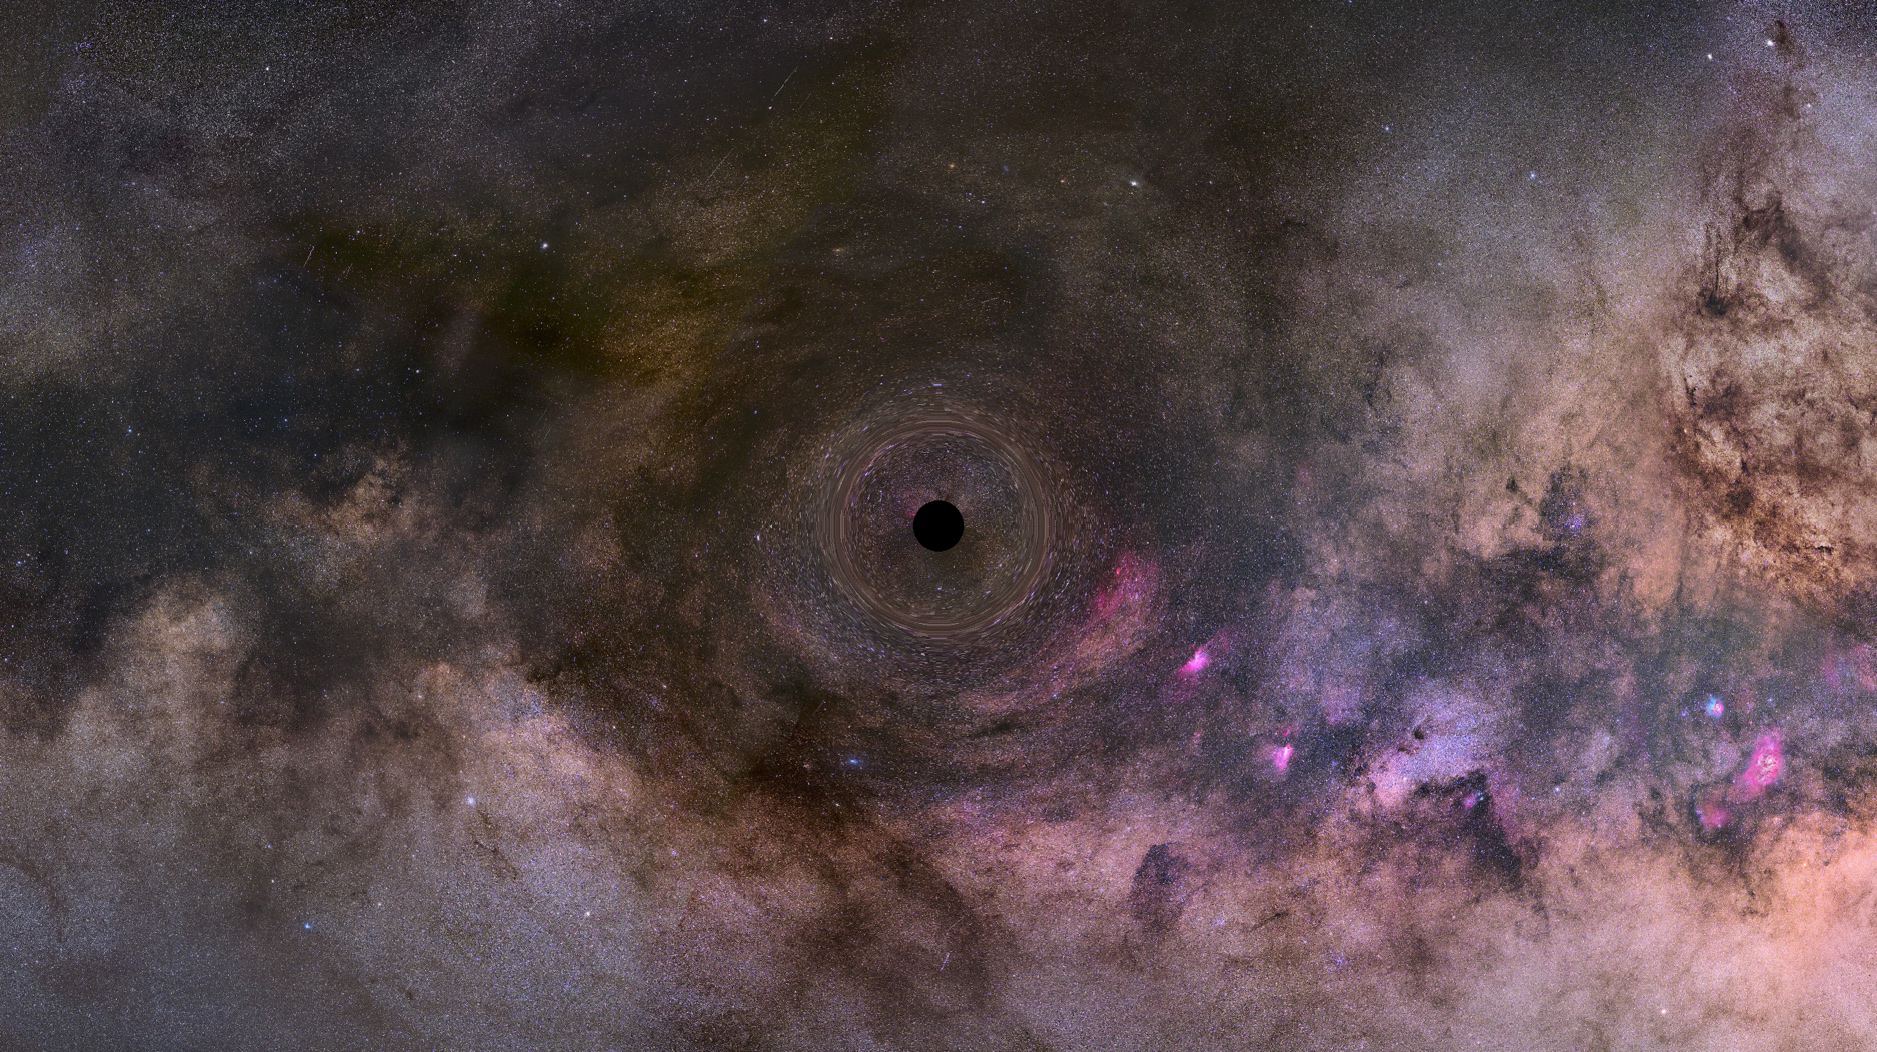 This isolated black hole is roaming our Milky Way galaxy